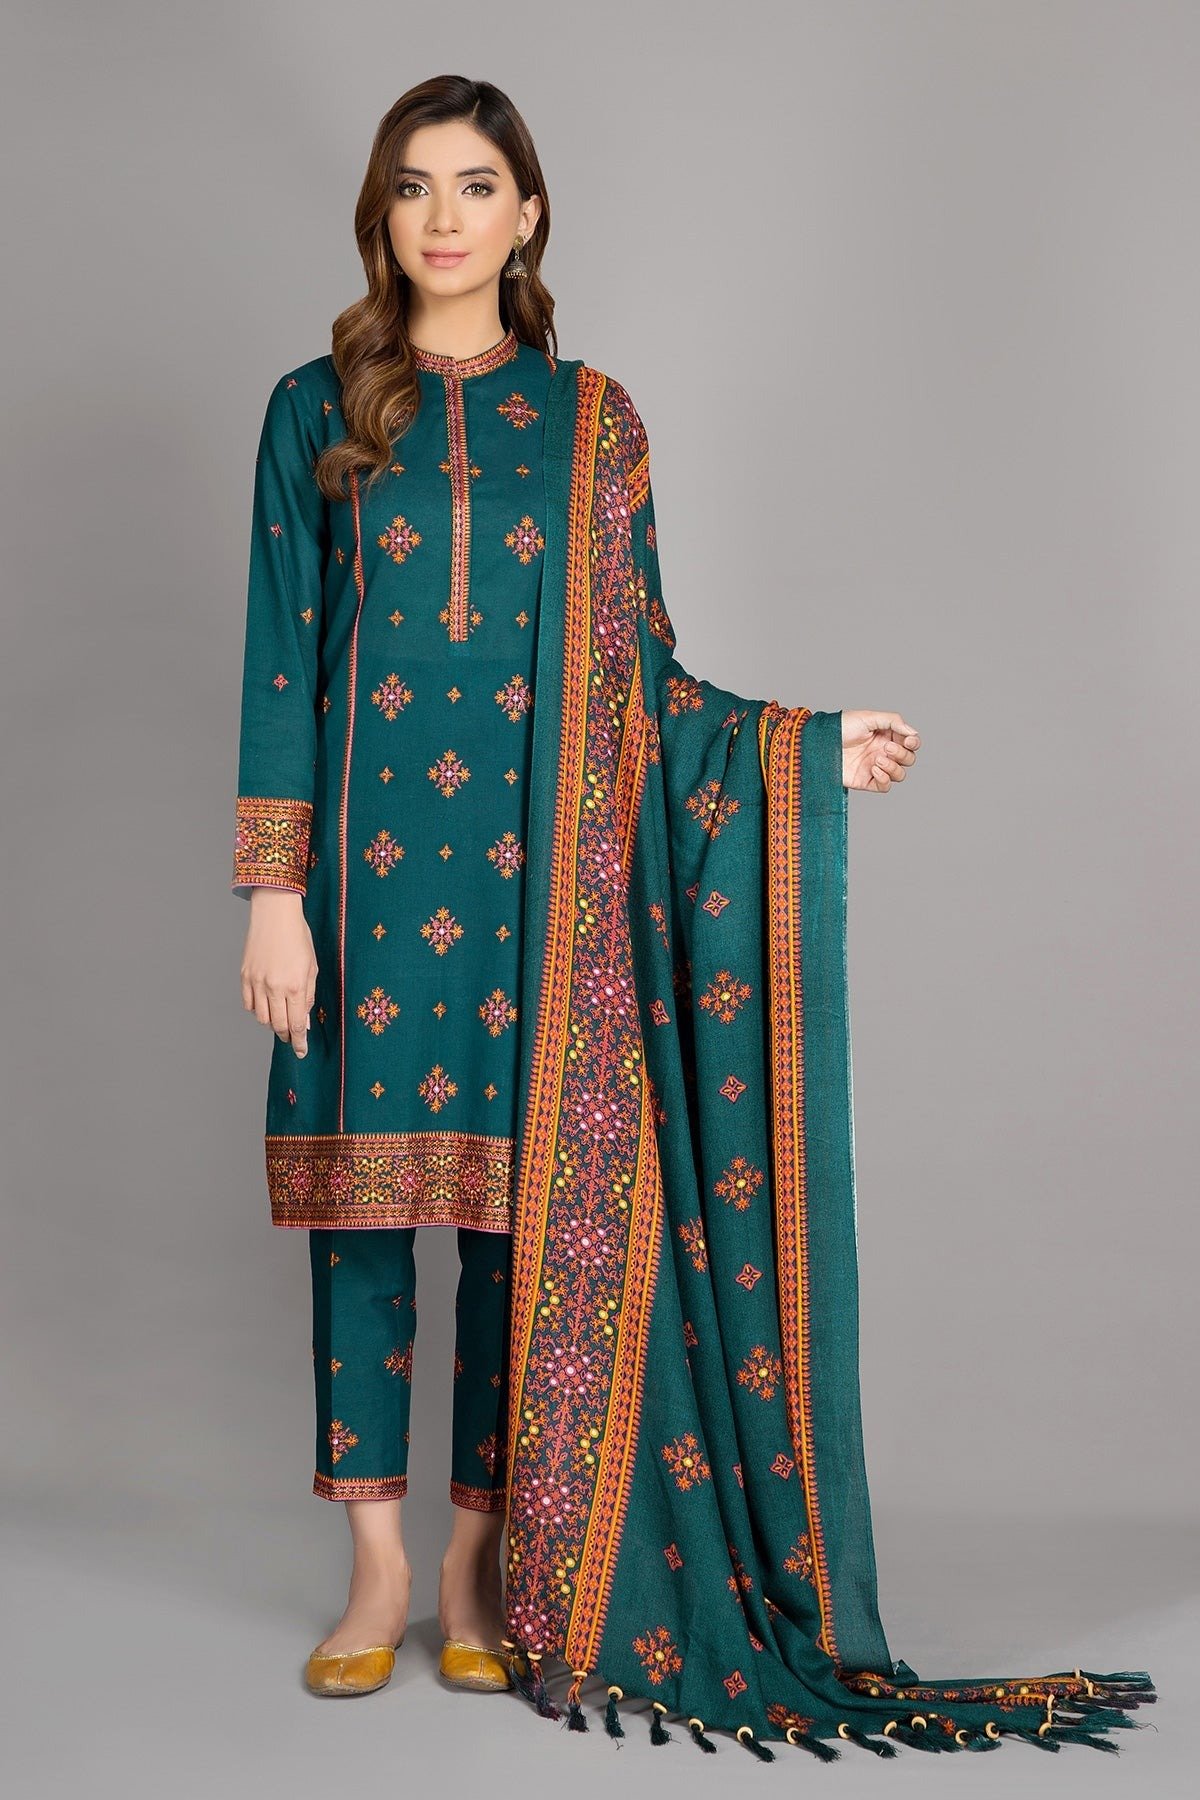 Kayseria New Women Dress Design winters suit Empires Collection Pakistan Clothing 3piece fashion